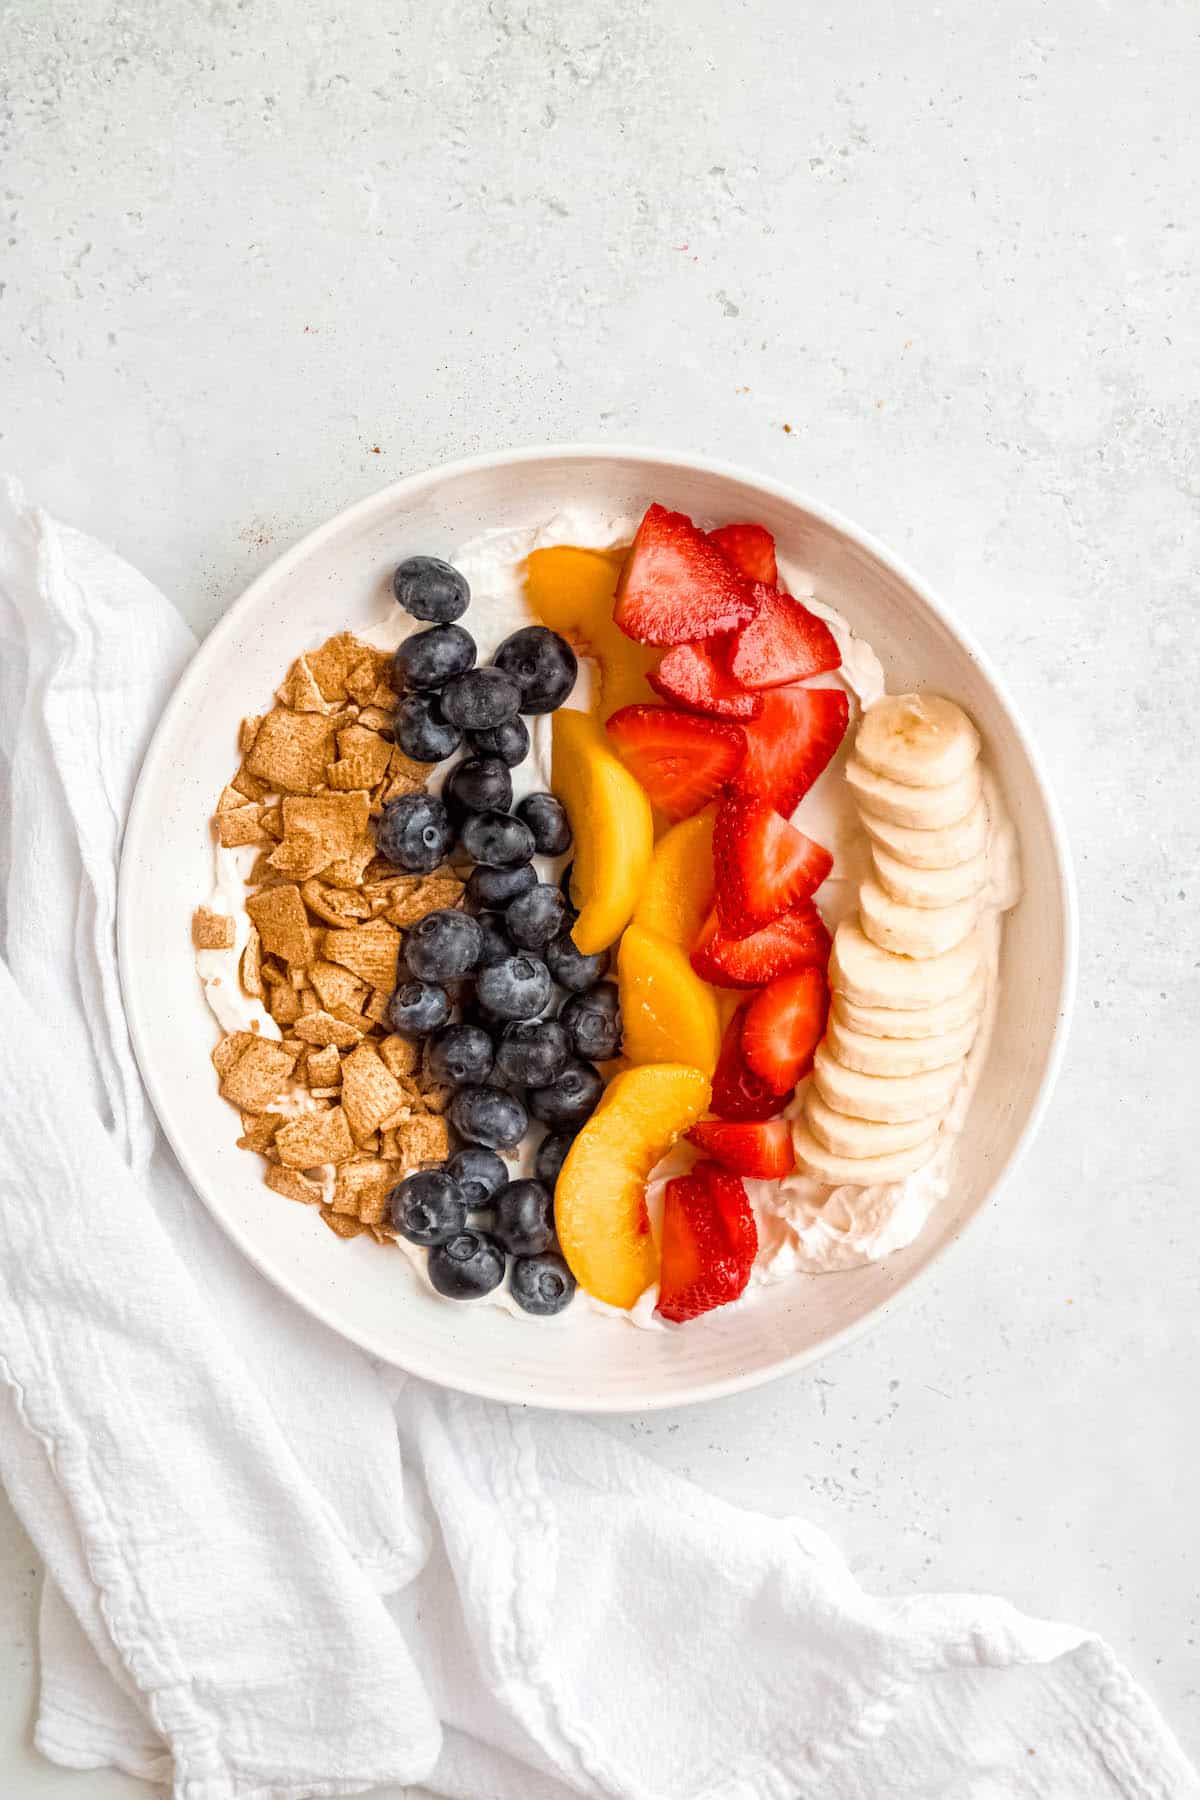 sliced bananas, strawberries, peaches, and blueberries added to the bowl.